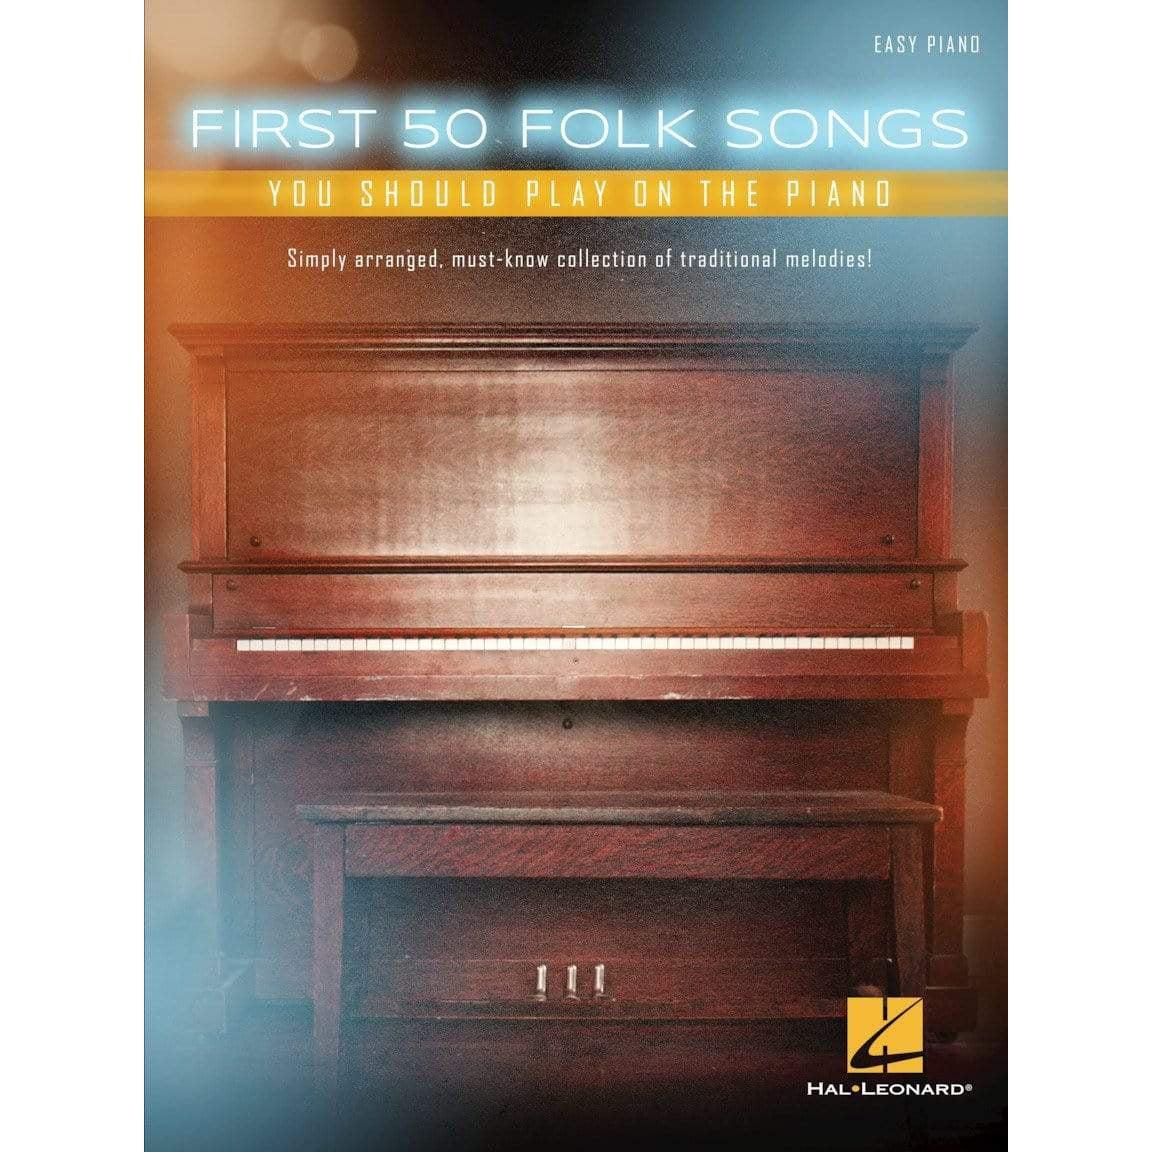 Hal Leonard First 50 Folk Songs You Should Play on the Piano